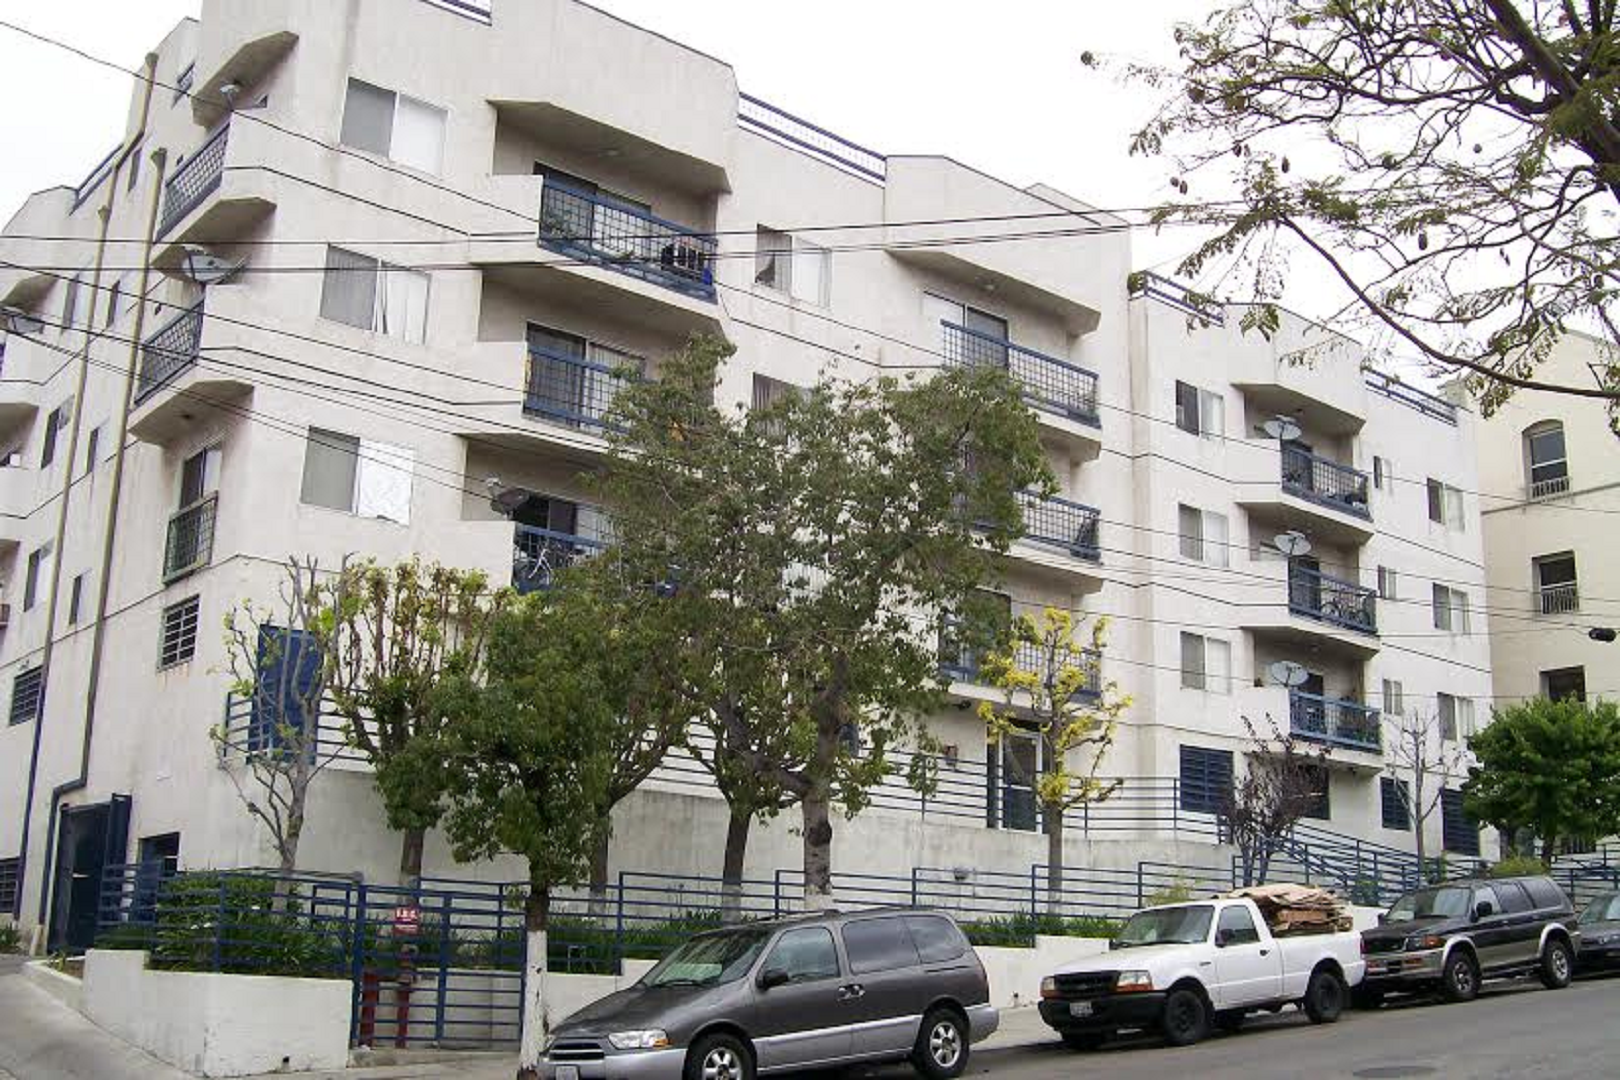 Five story white building that sits on a hill. Front entrance has blue long bars.Building also contains balconies with blue bars.